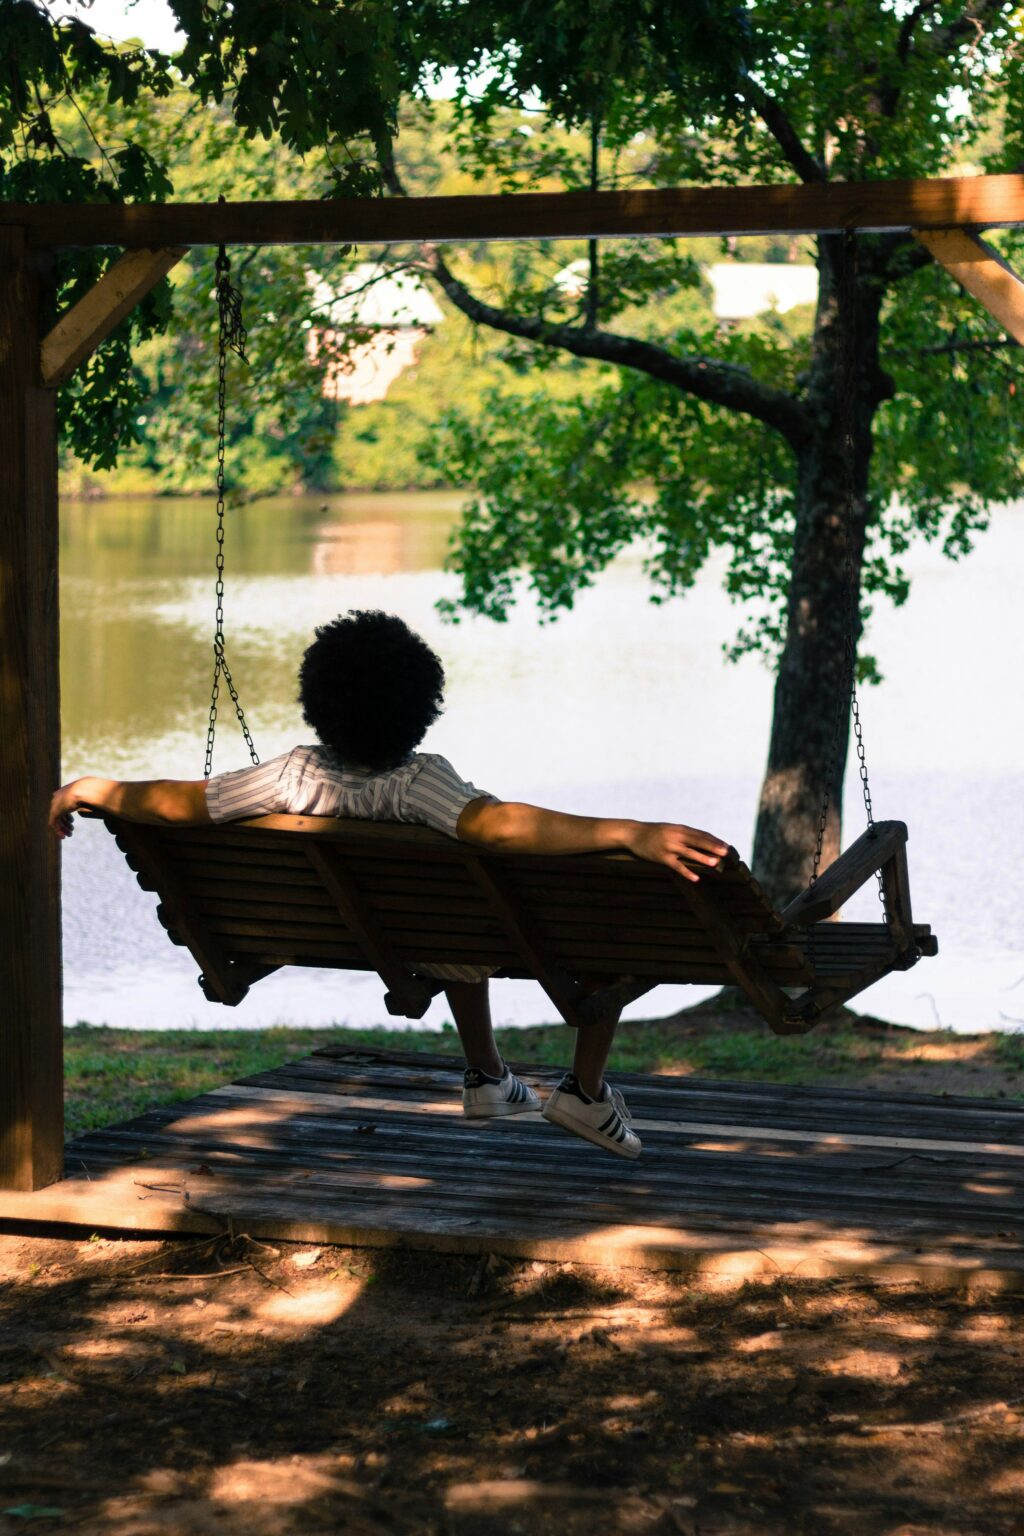 Man on a hanging bench looking at a lake enjoying the view.